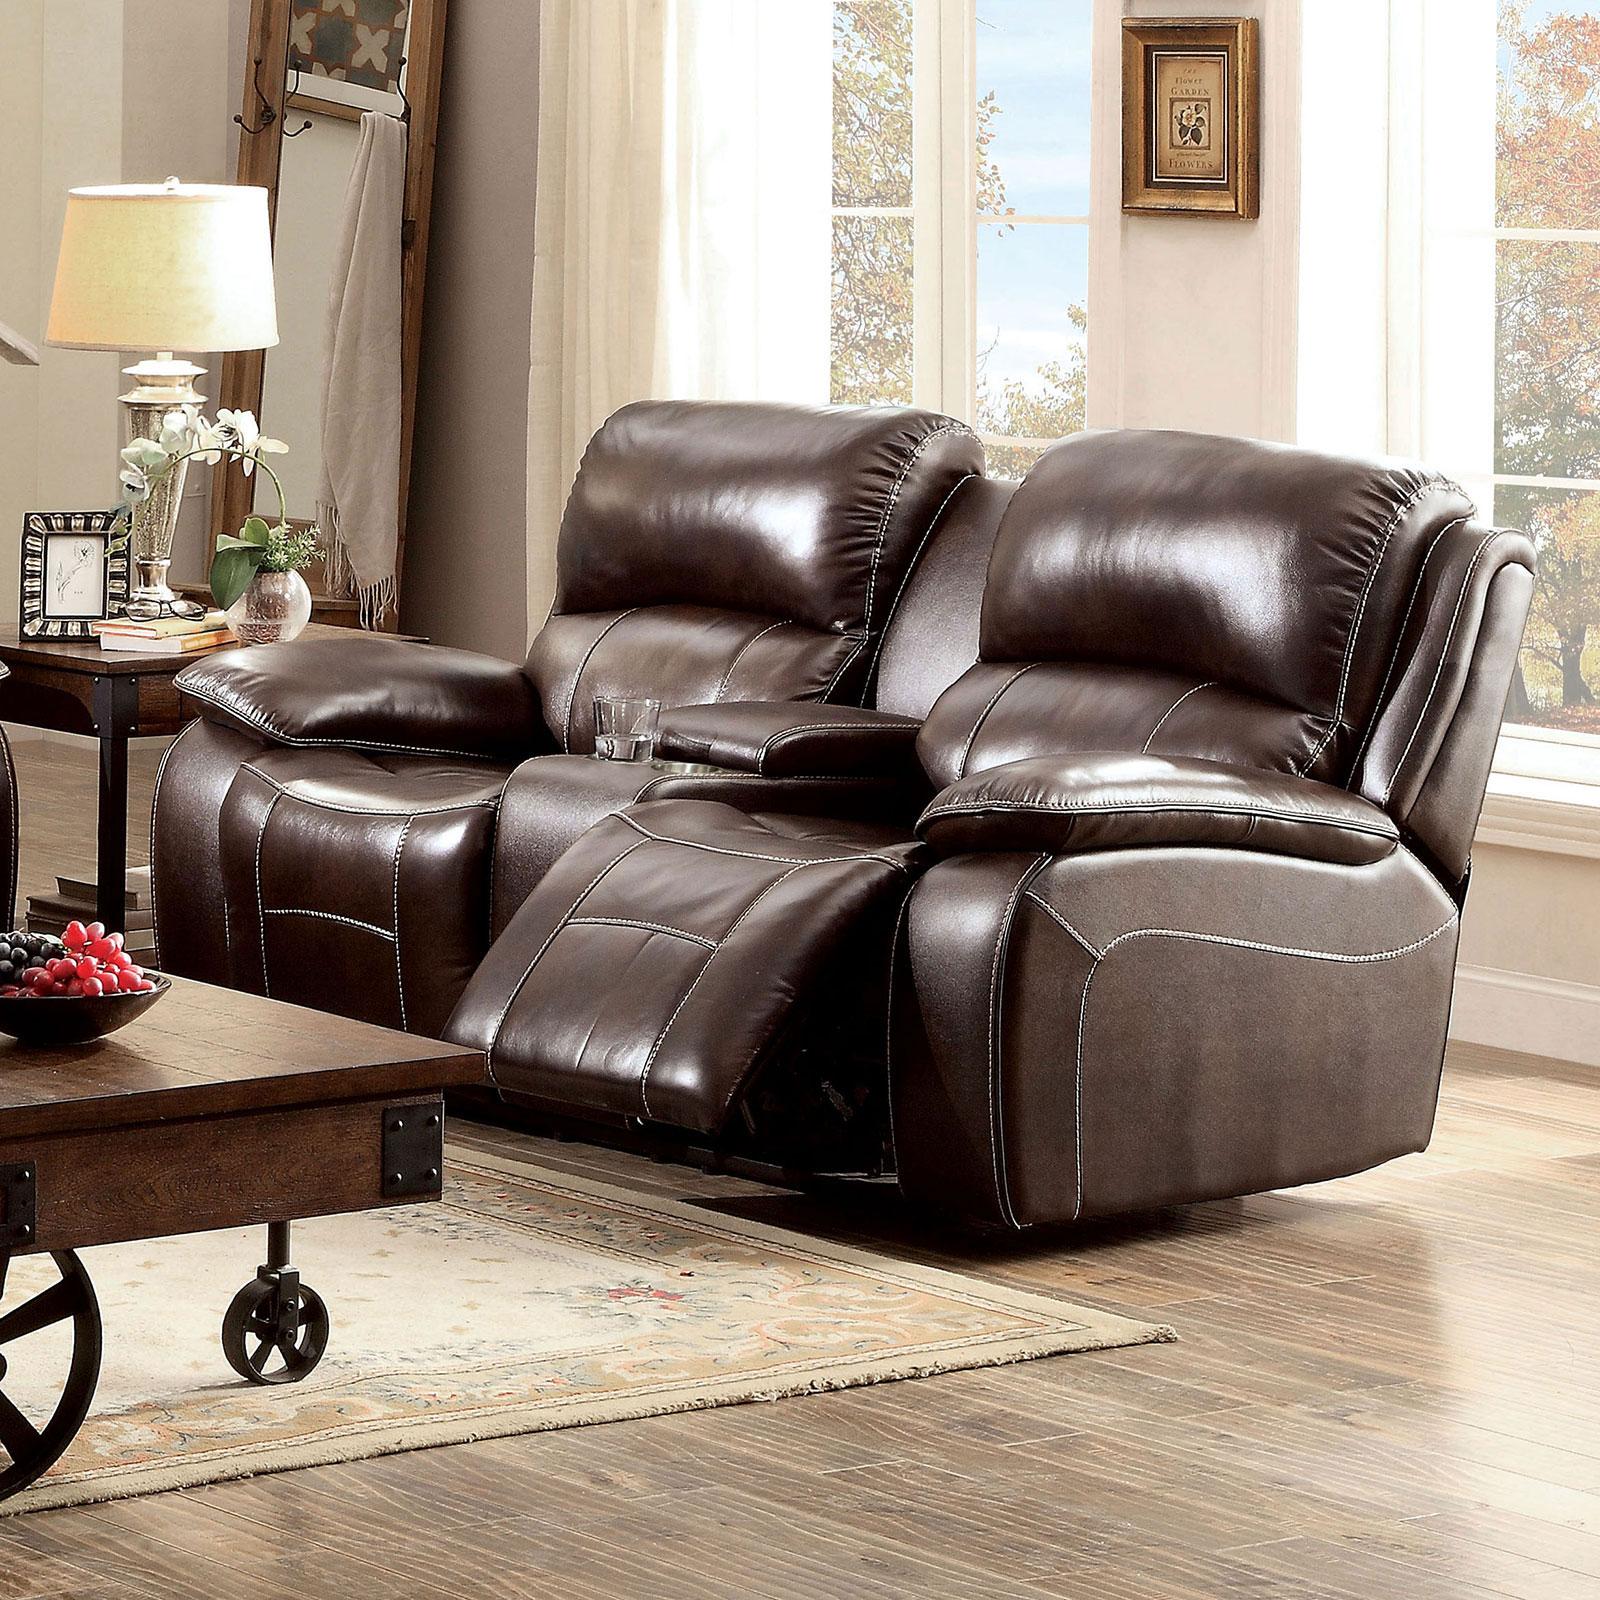 Transitional Loveseat RUTH CM6783BR-LV CM6783BR-LV in Brown Faux Leather